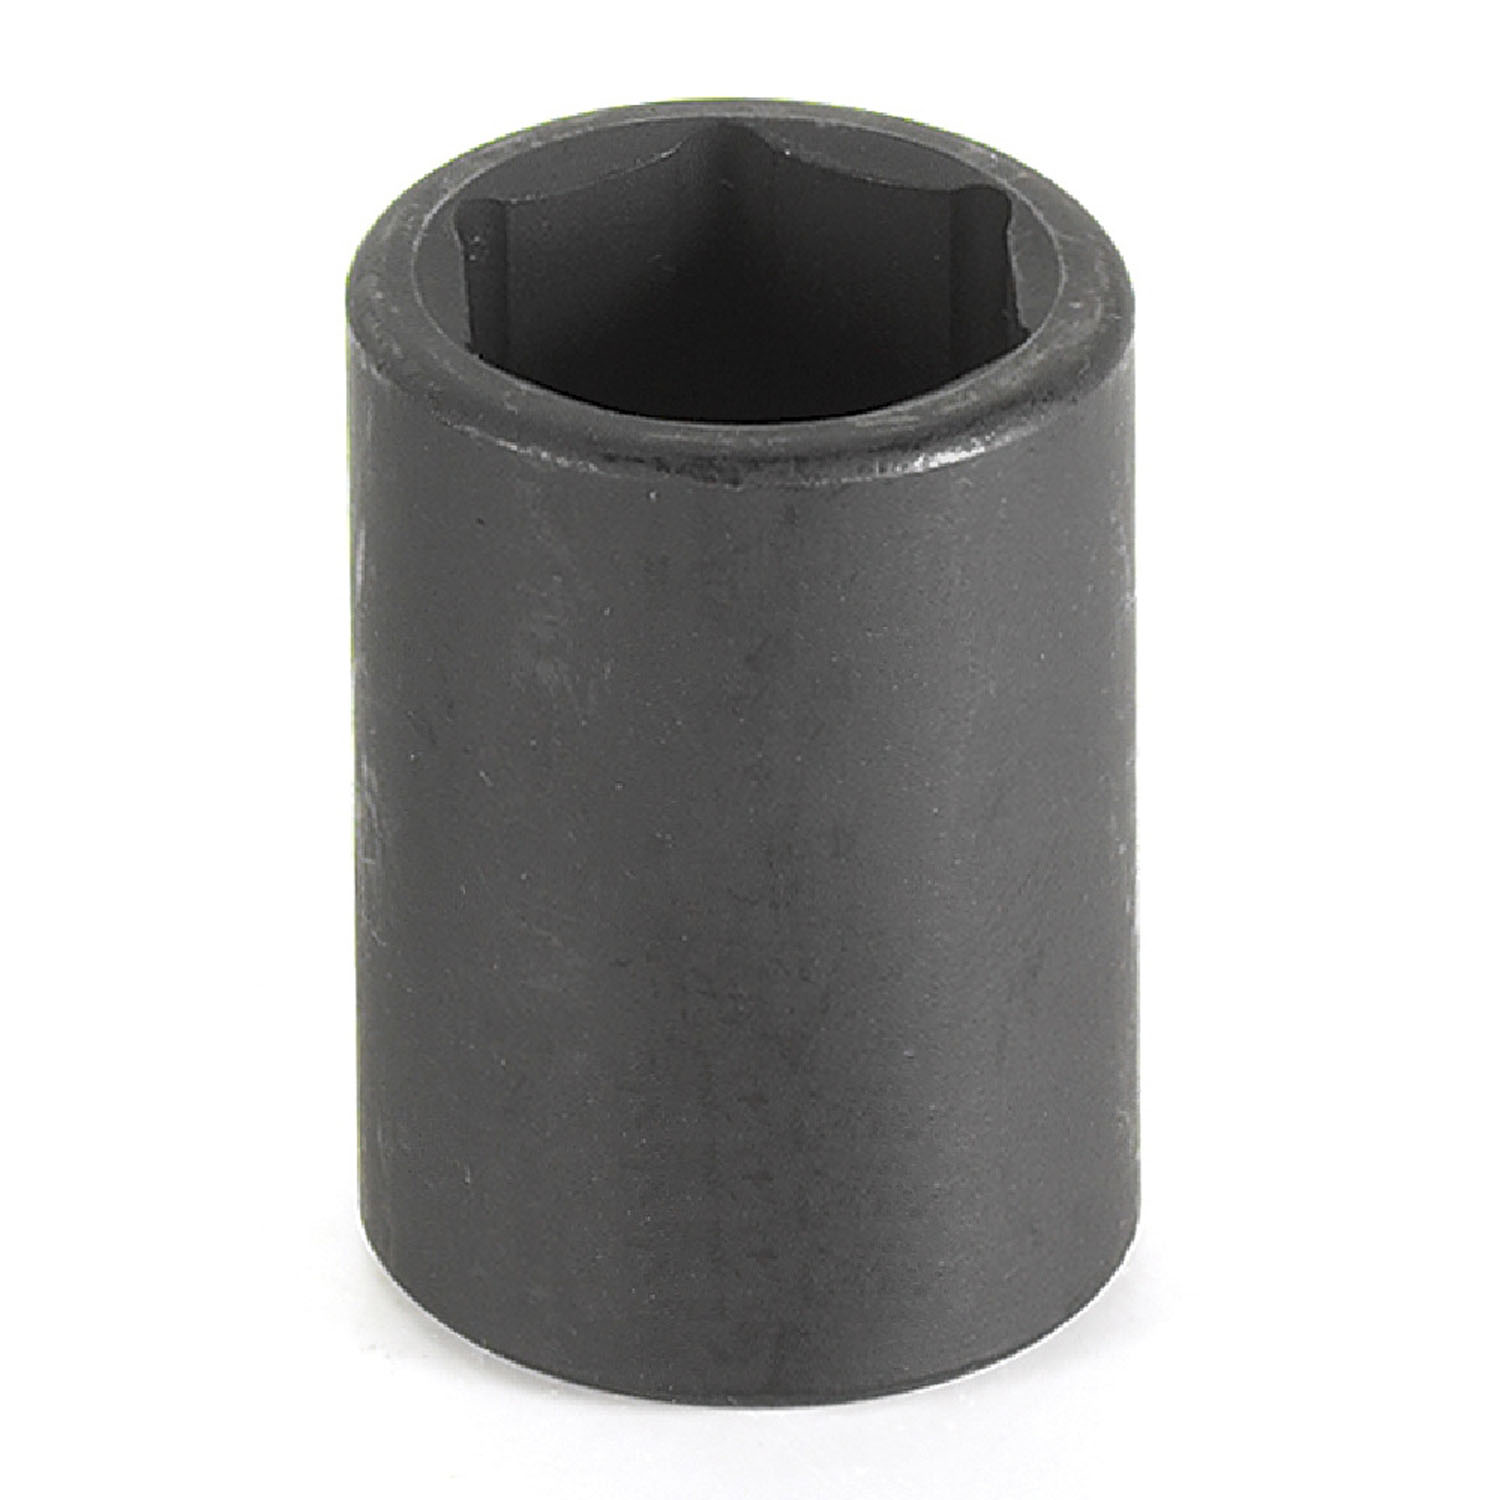 1/2 IN. DRIVE STANDARD LENGTH IMPACT 6 POINT SOCKETS (MULTIPLE SIZES AVAILABLE)